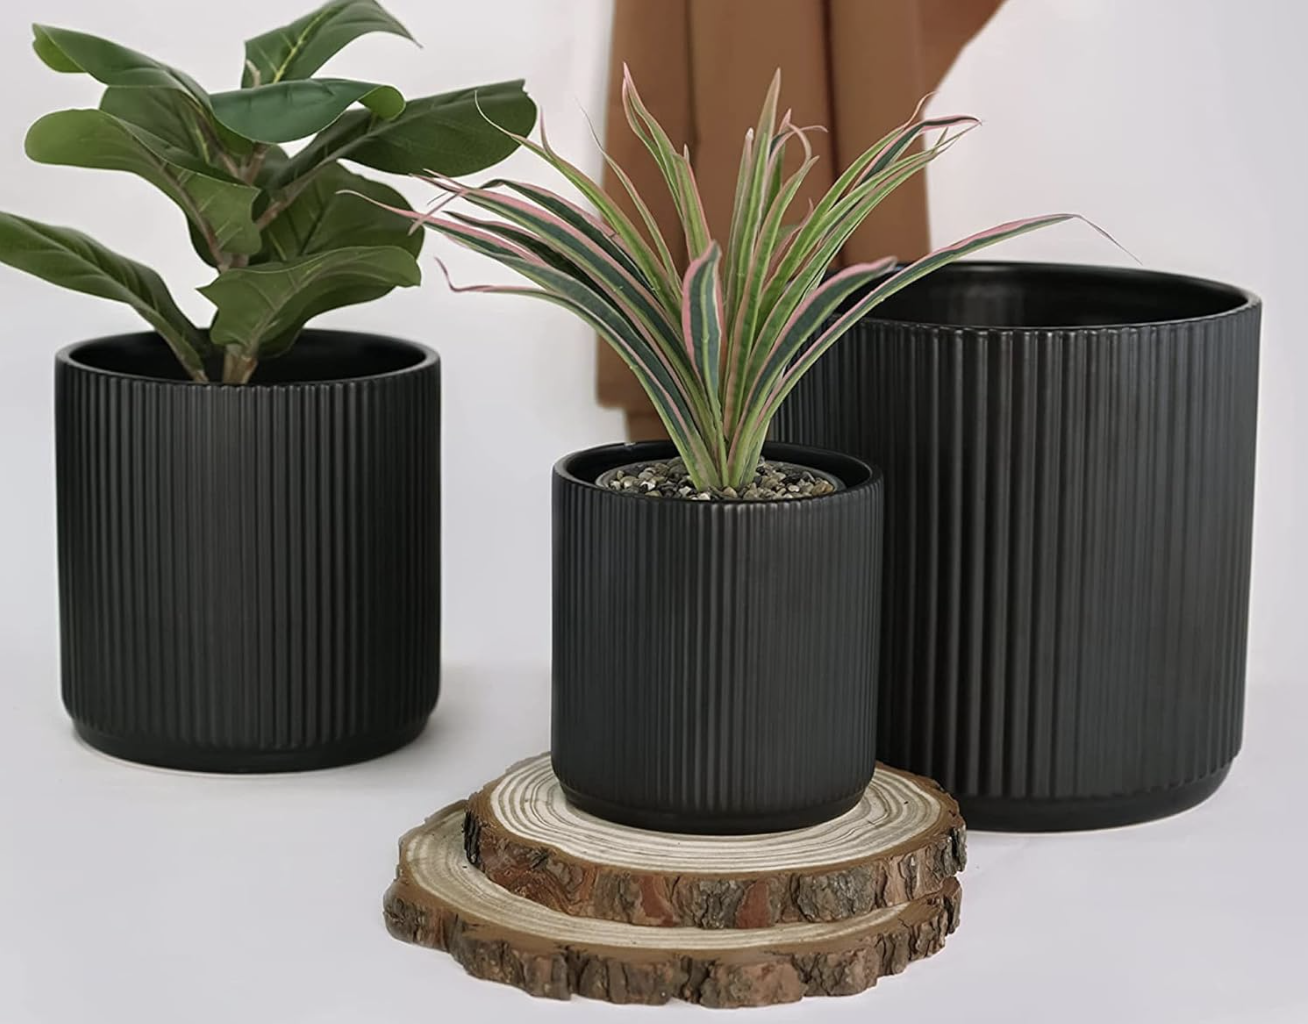 The three fluted black planters in different sizes